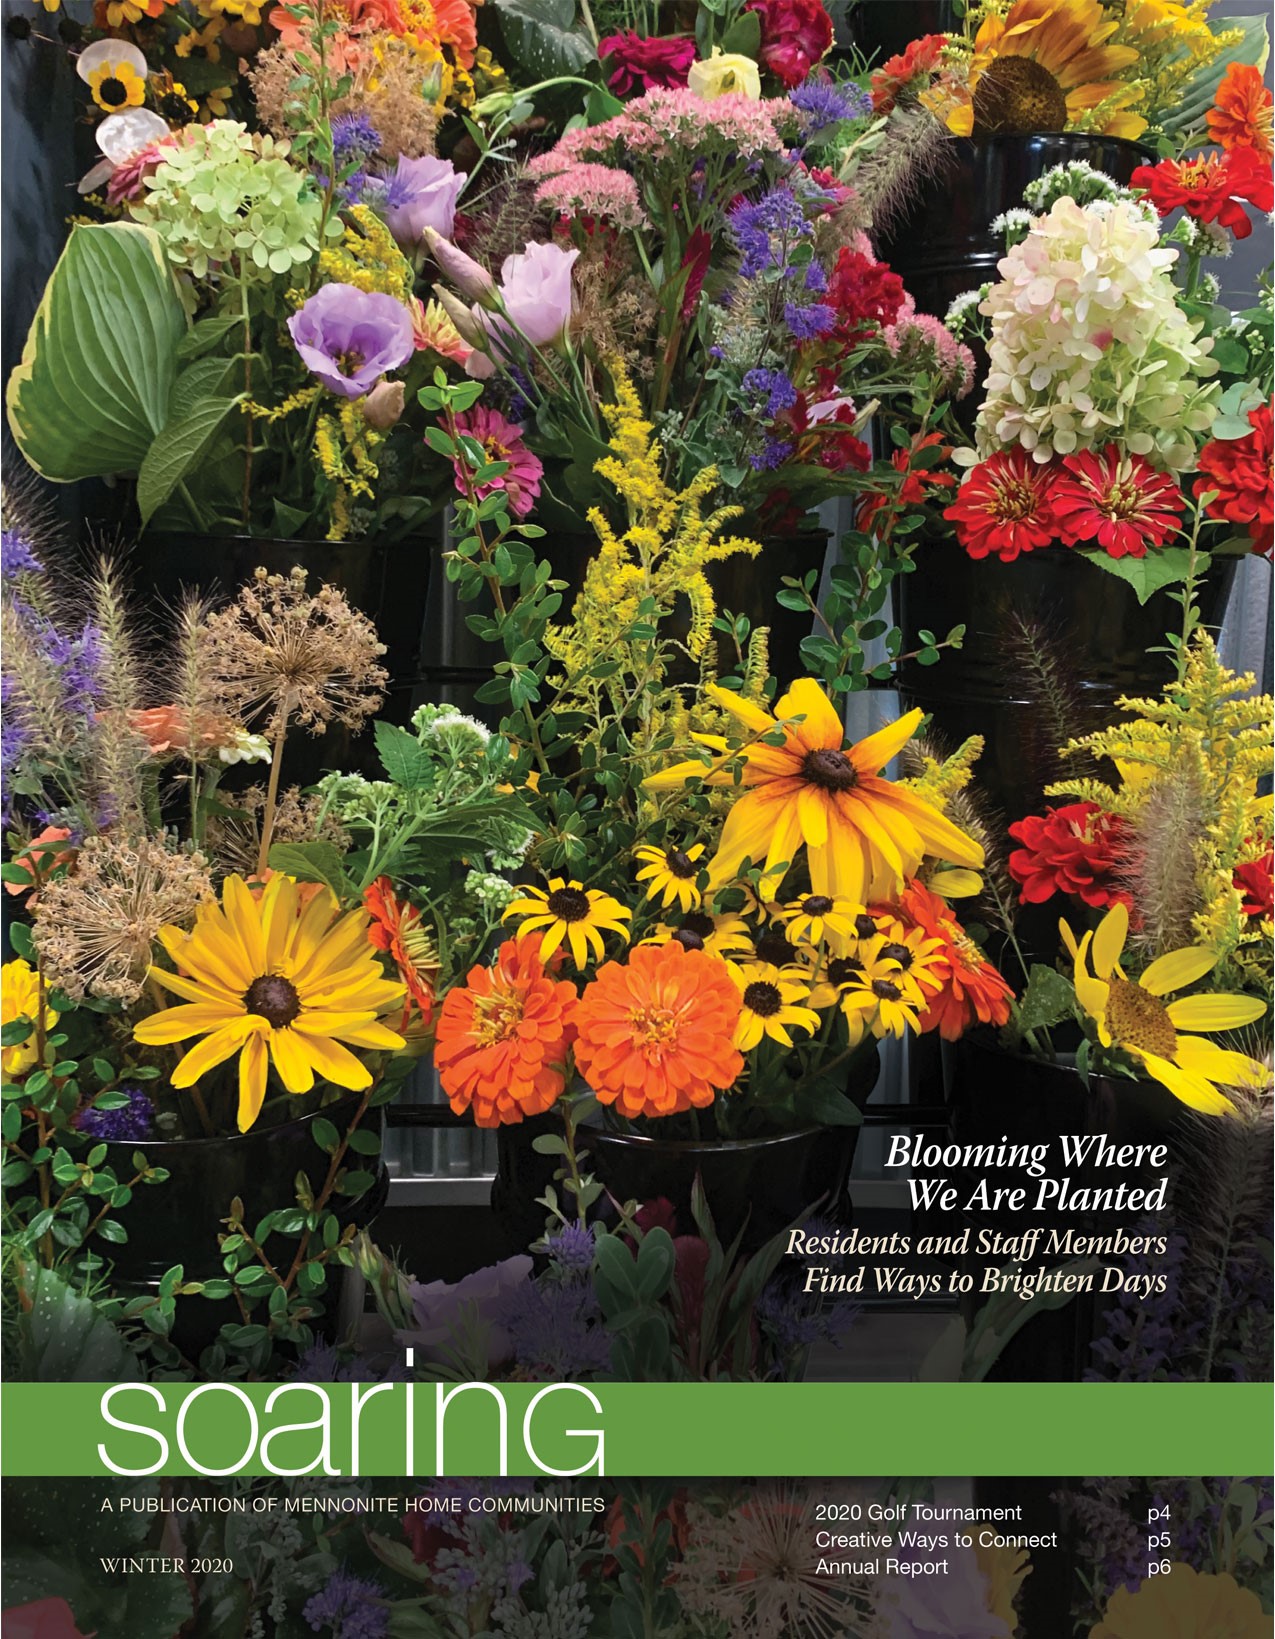 Flowers on the cover of the Winter 2020 Soaring Newsletter